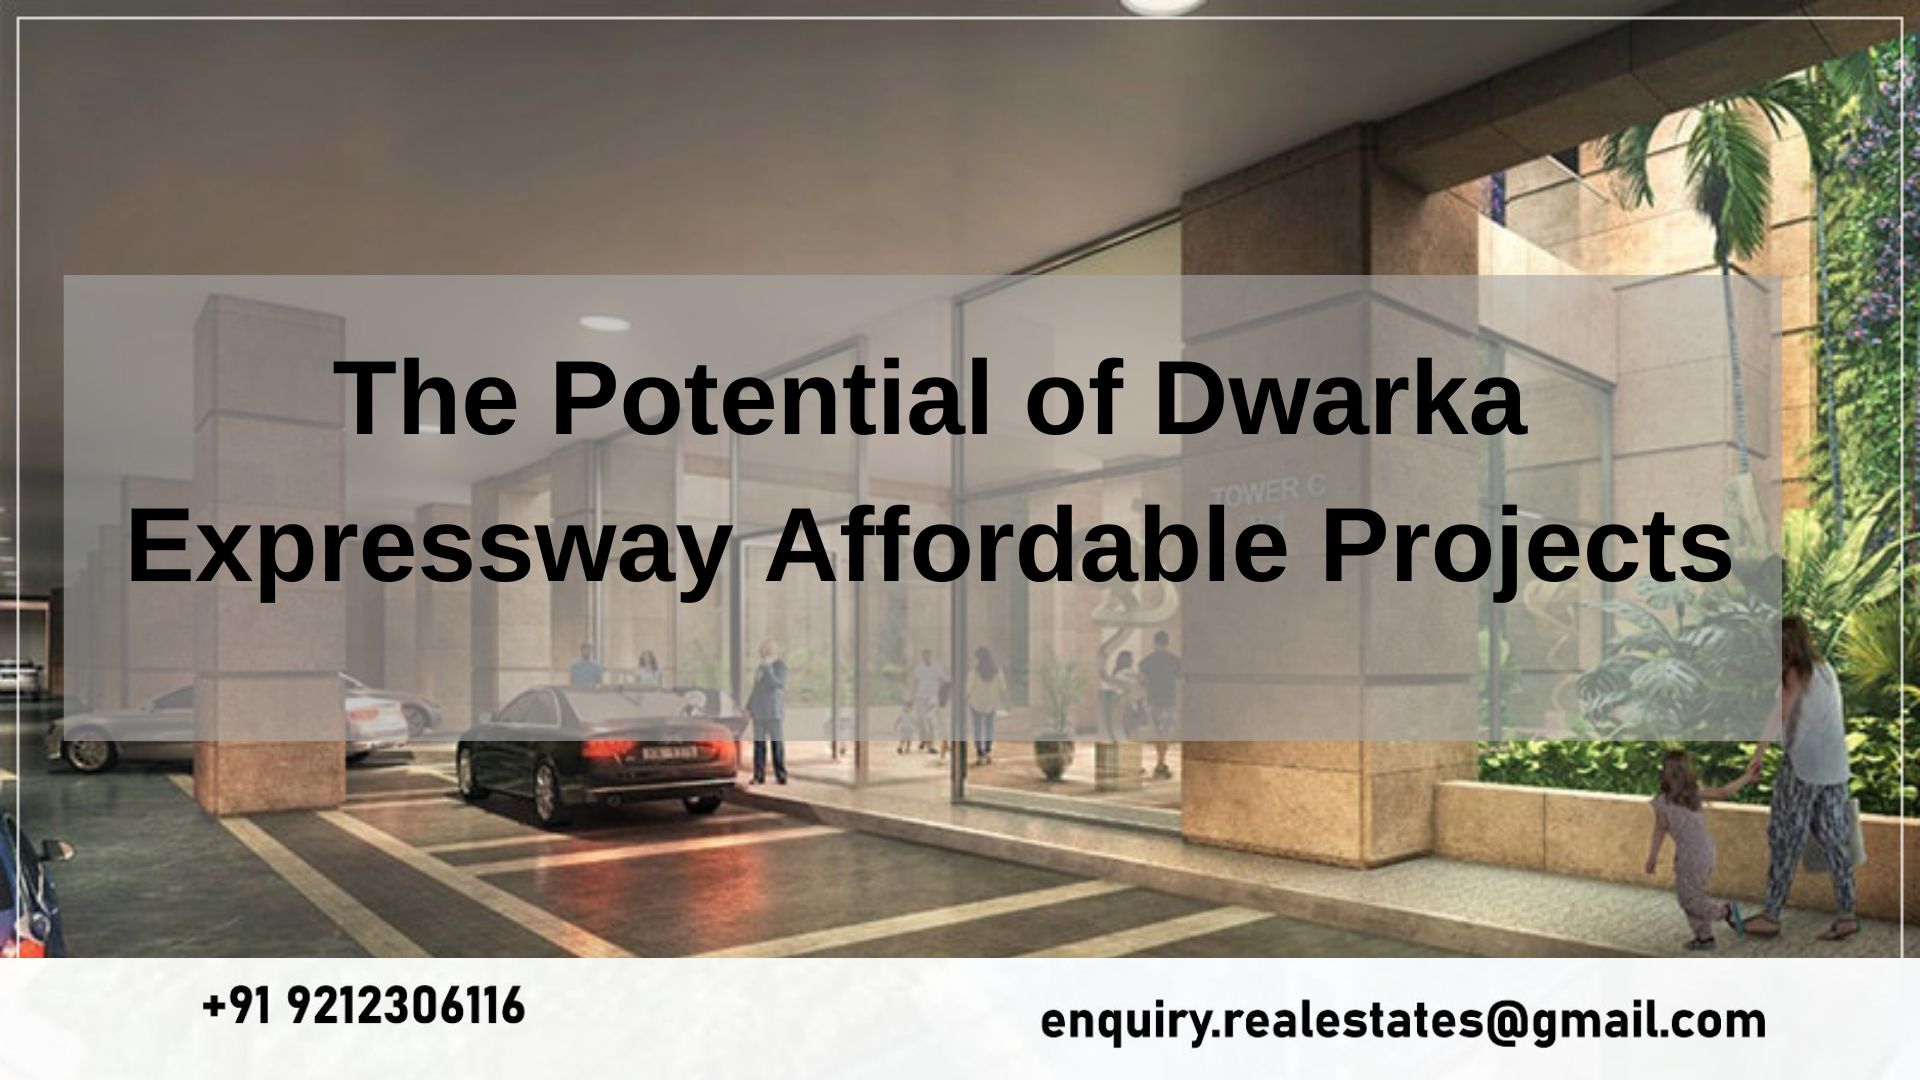 The Potential of Dwarka Expressway Affordable Projects